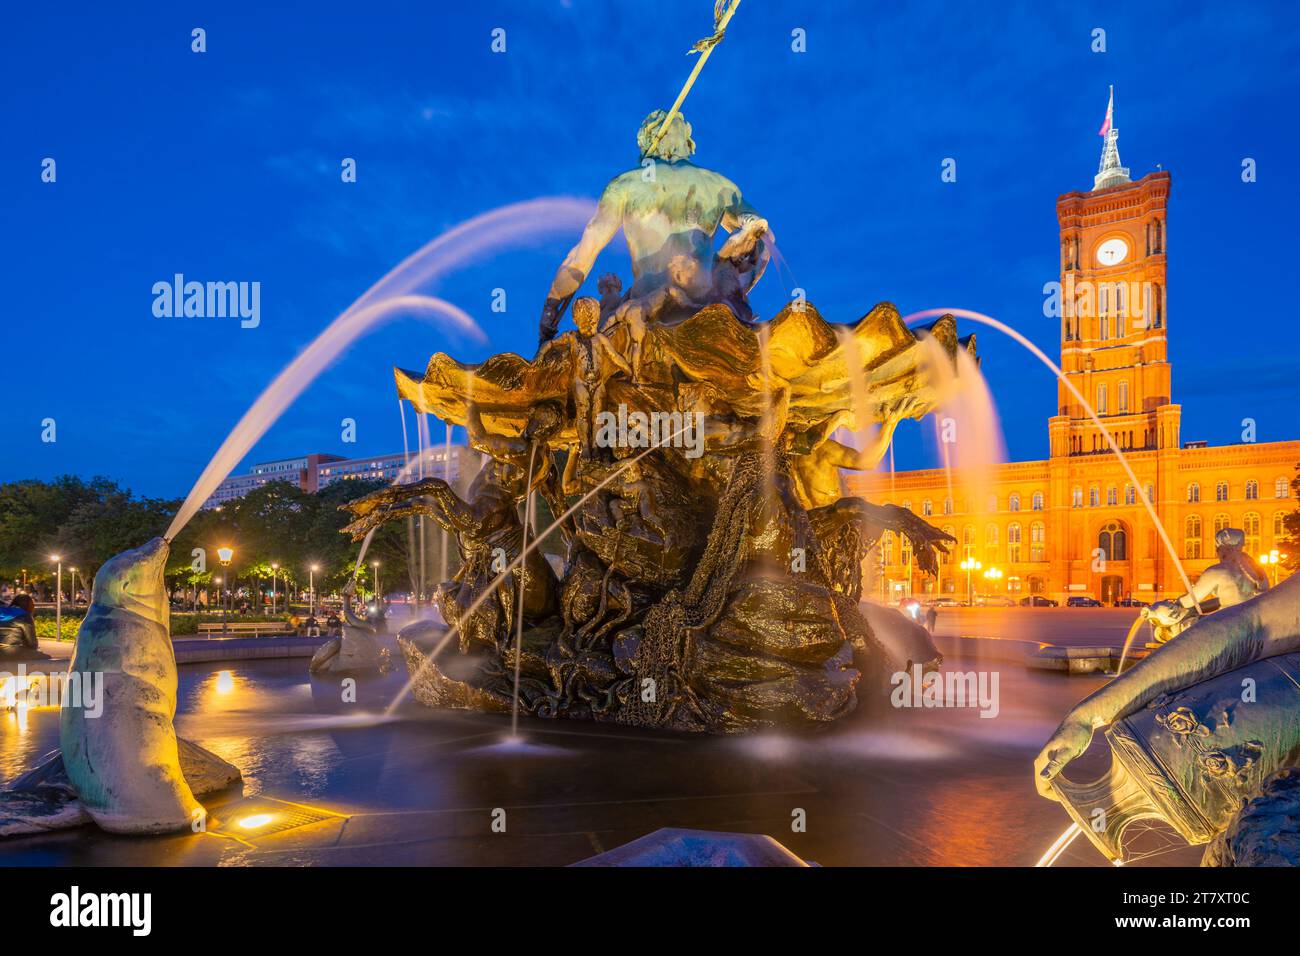 View of Rotes Rathaus (Town Hall) and Neptunbrunnen fountain at dusk, Panoramastrasse, Berlin, Germany, Europe Stock Photo